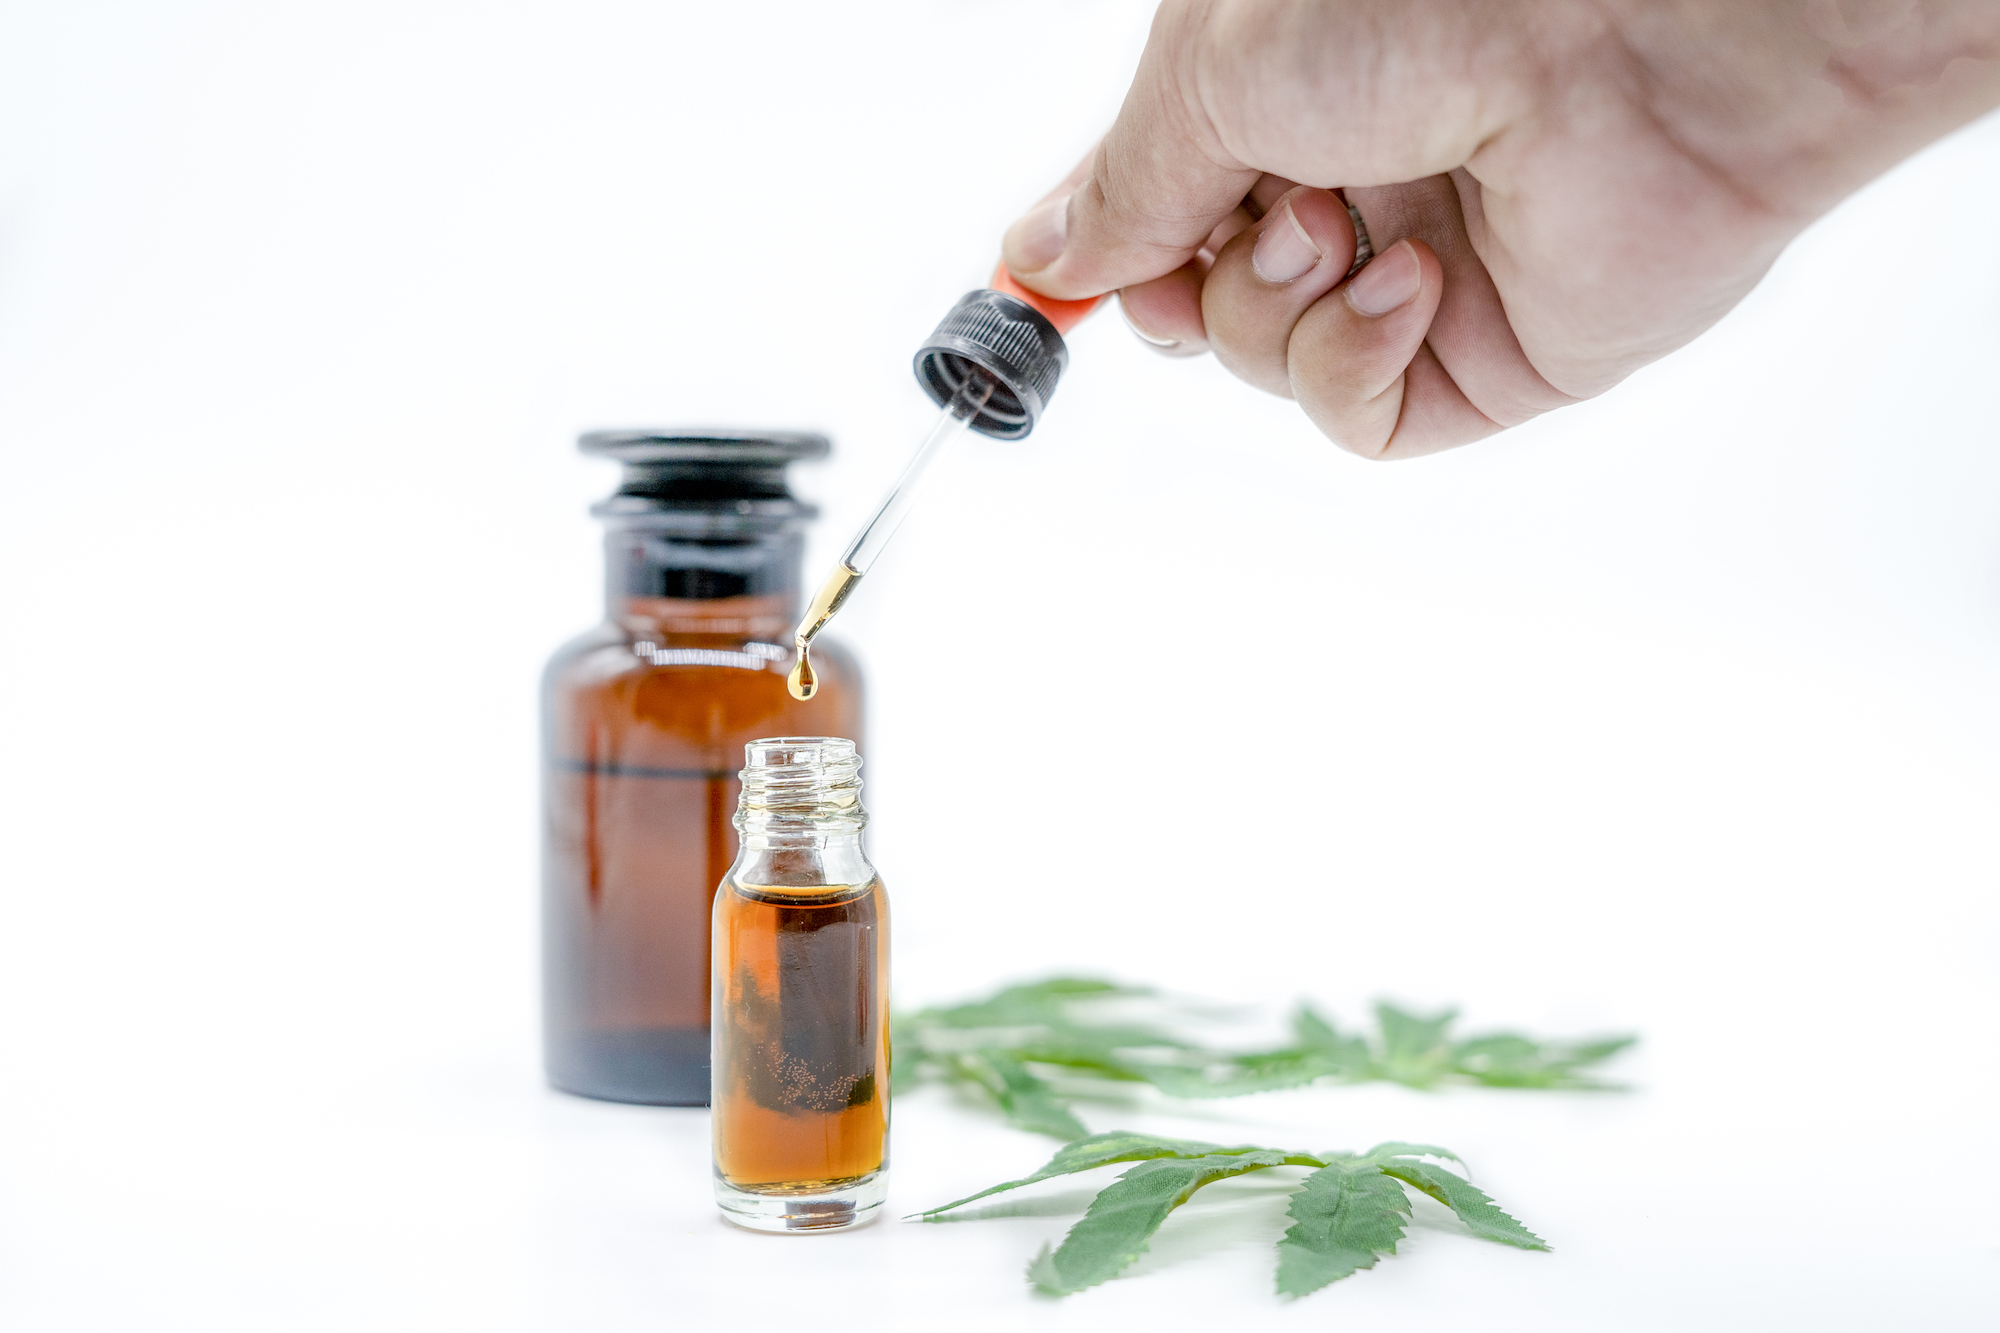 Why should a person invest money in the CBD oil?